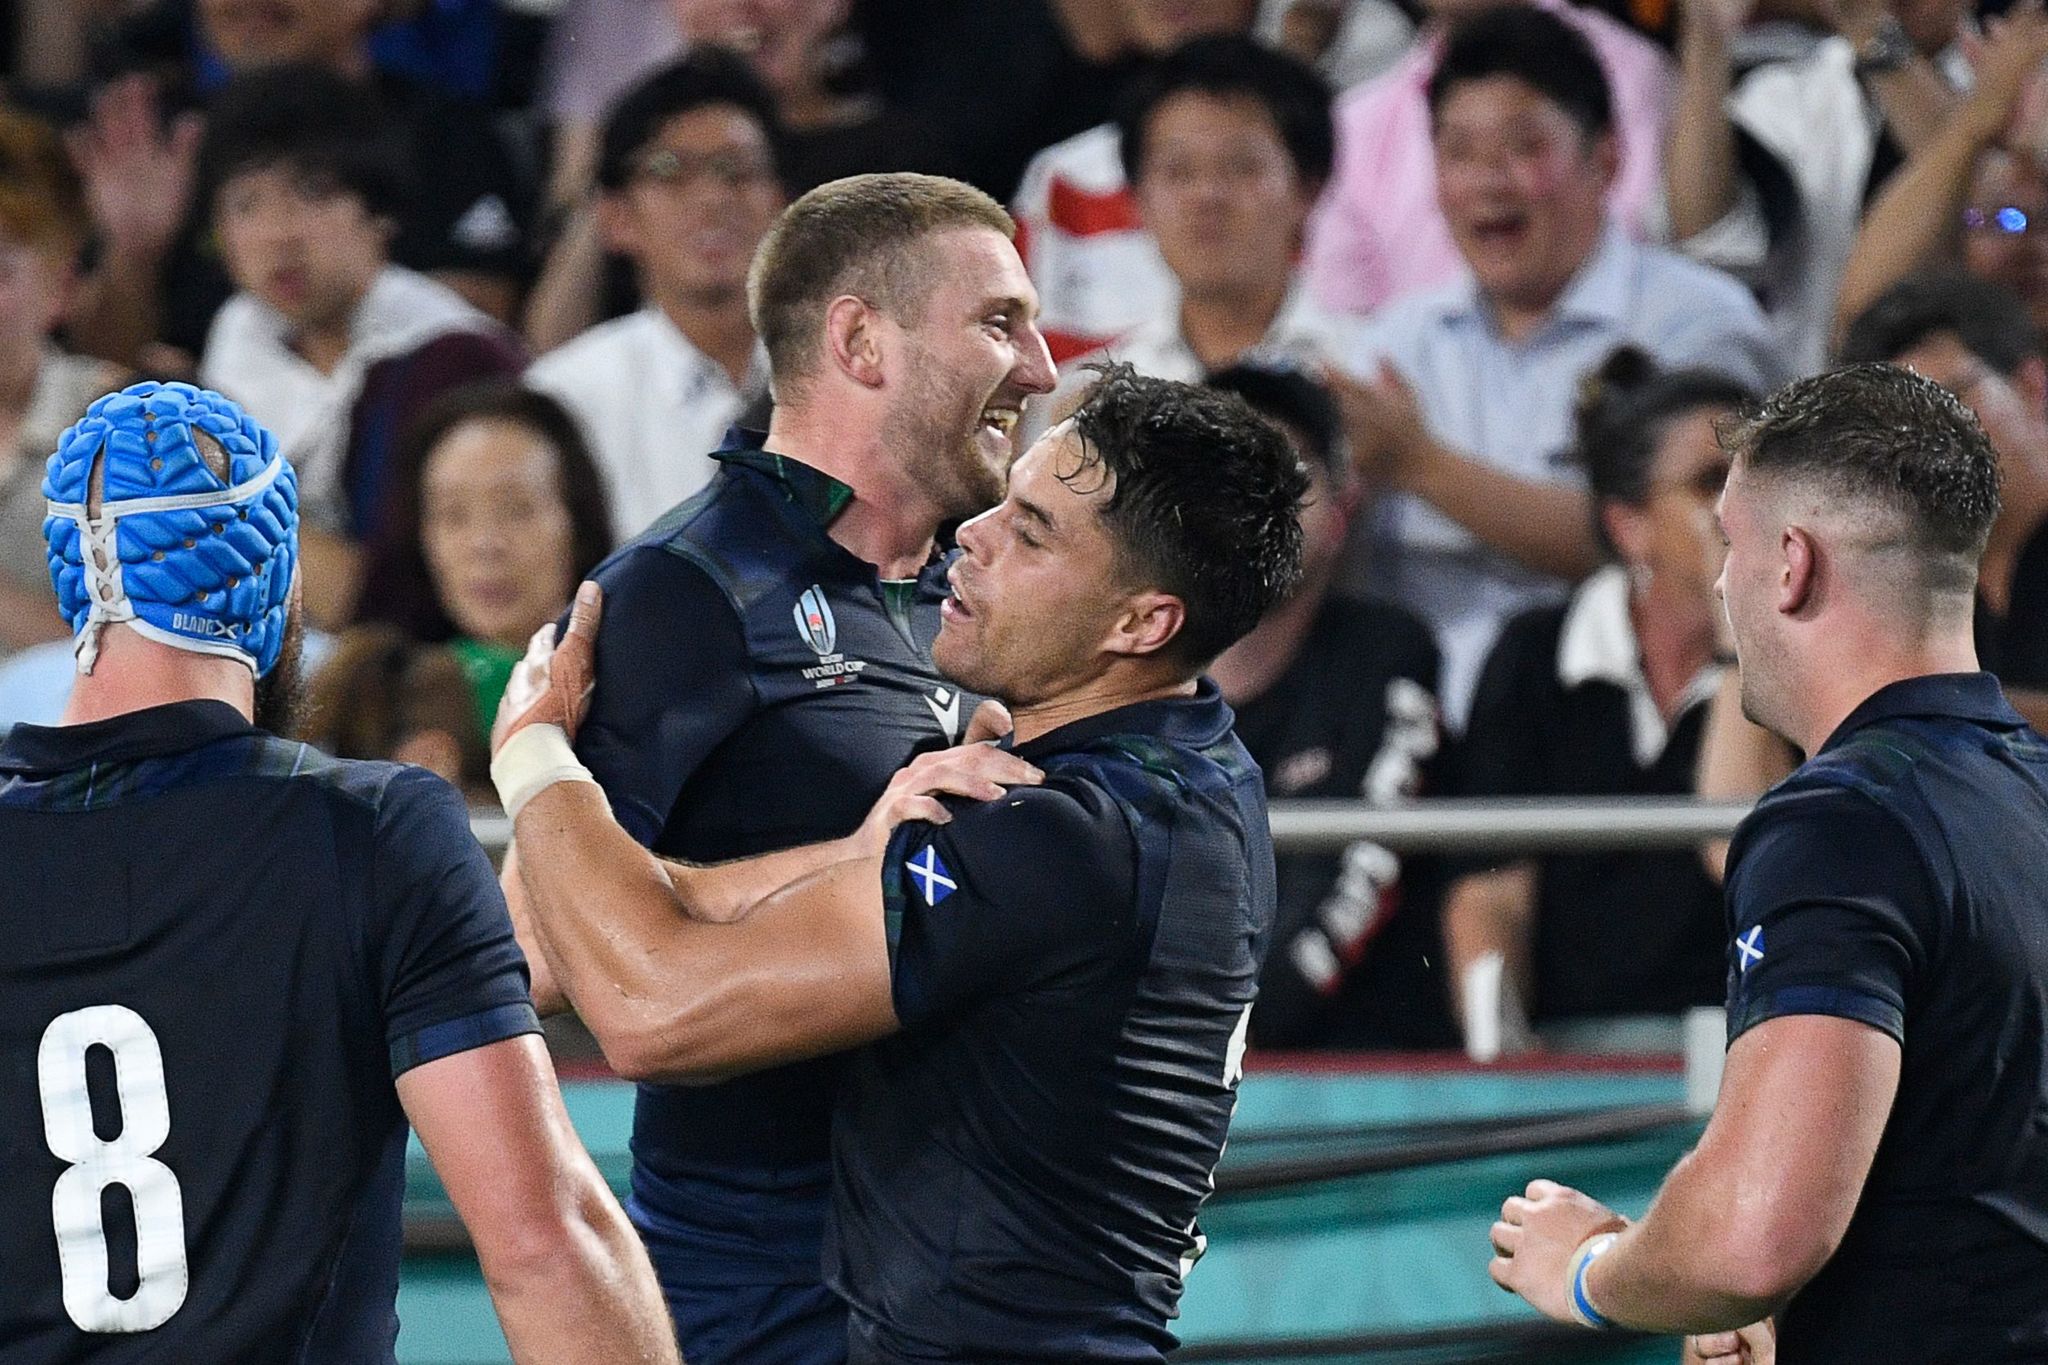 <HIT>Scotland</HIT>s wing Sean Maitland (2R) celebrates with <HIT>Scotland</HIT>s fly-half Finn Russell (2L) after scoring a try during the Japan 2019 Rugby World Cup Pool A match between <HIT>Scotland</HIT> and Samoa at the Kobe Misaki Stadium in Kobe on September 30, 2019. (Photo by Filippo MONTEFORTE / AFP)